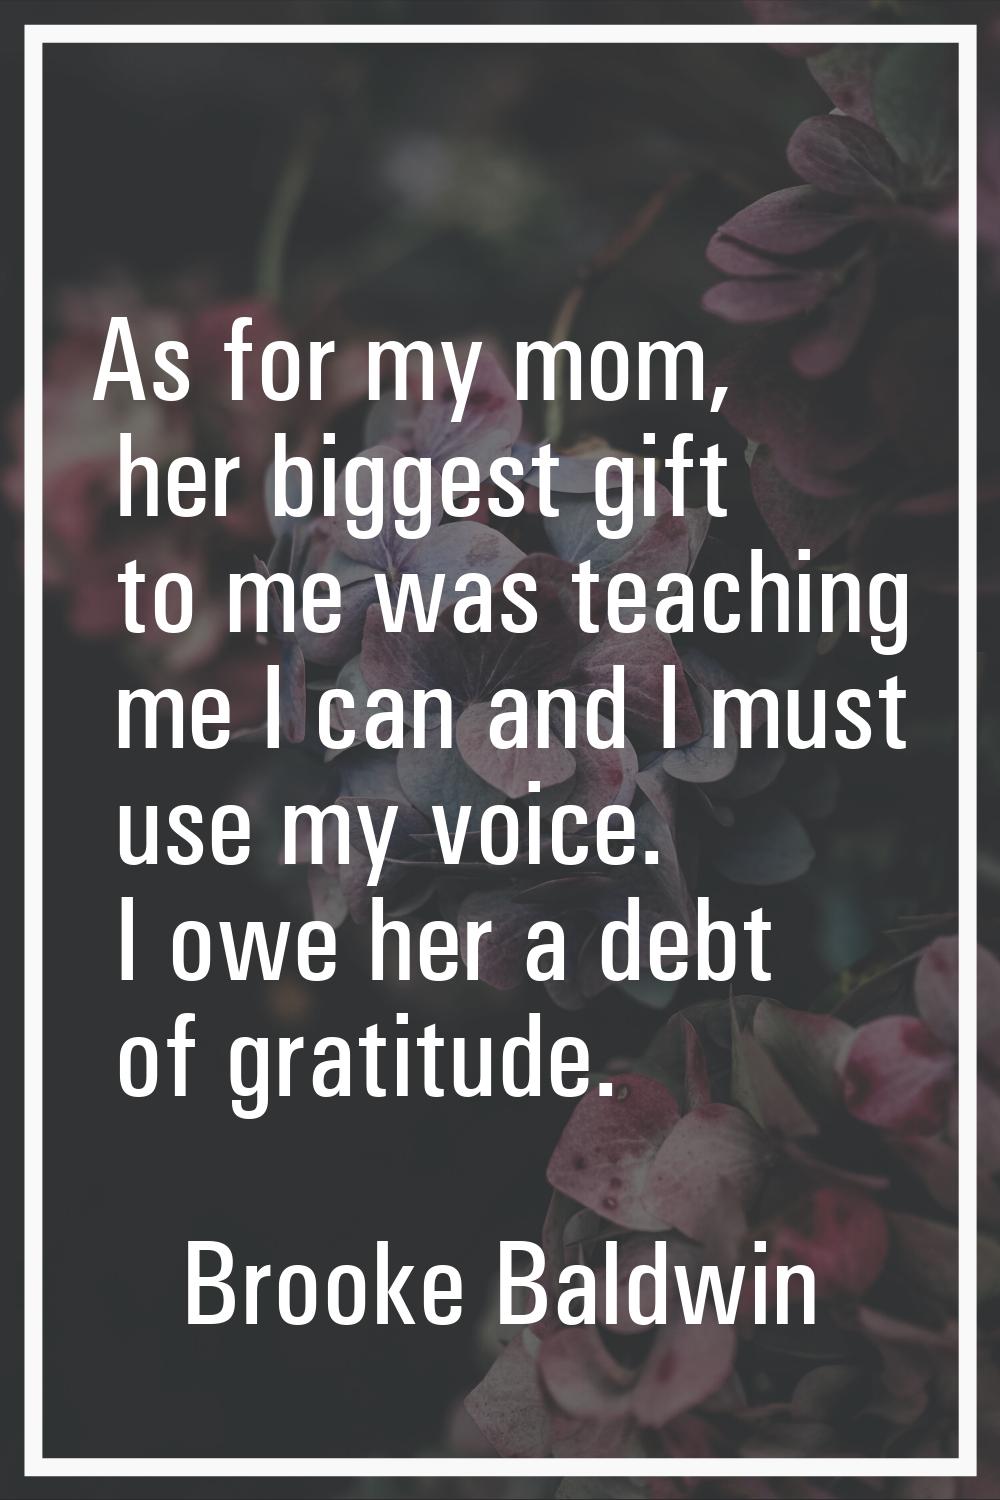 As for my mom, her biggest gift to me was teaching me I can and I must use my voice. I owe her a de